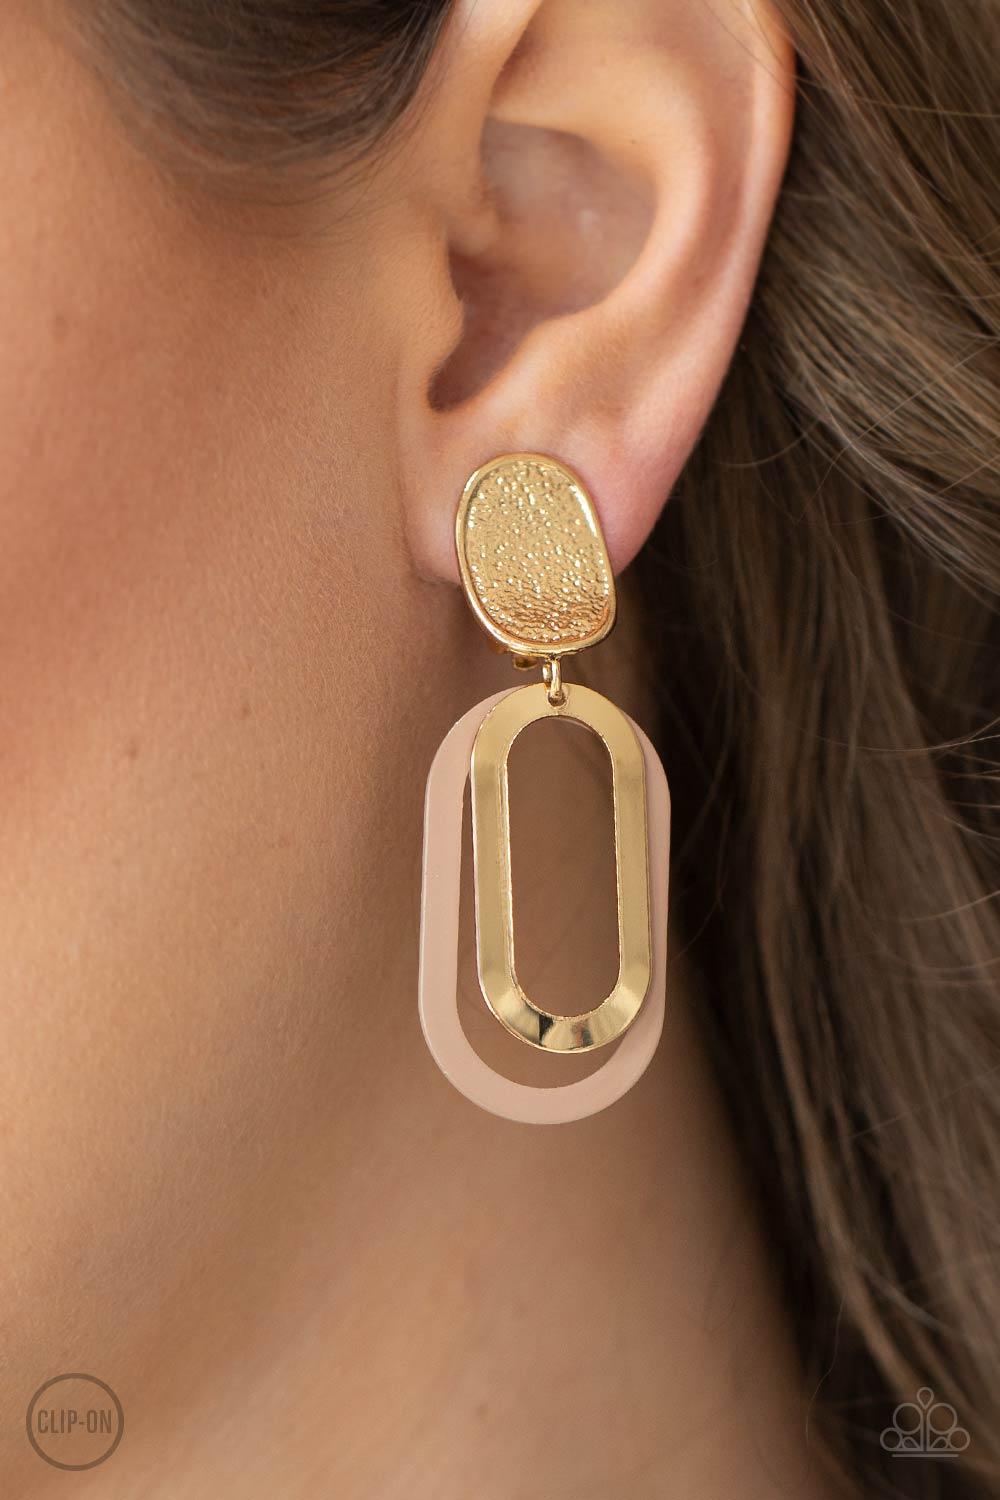 ​Melrose Mystery - Brown and Gold - Clip On Earrings - Paparazzi Accessories - Shiny gold and Iced Coffee oblong hoops dangle one in front of the other from a shimmery textured gold oval disc for an upscale finale. Earring attaches to a standard clip-on fitting. Sold as one pair of clip-on earrings.